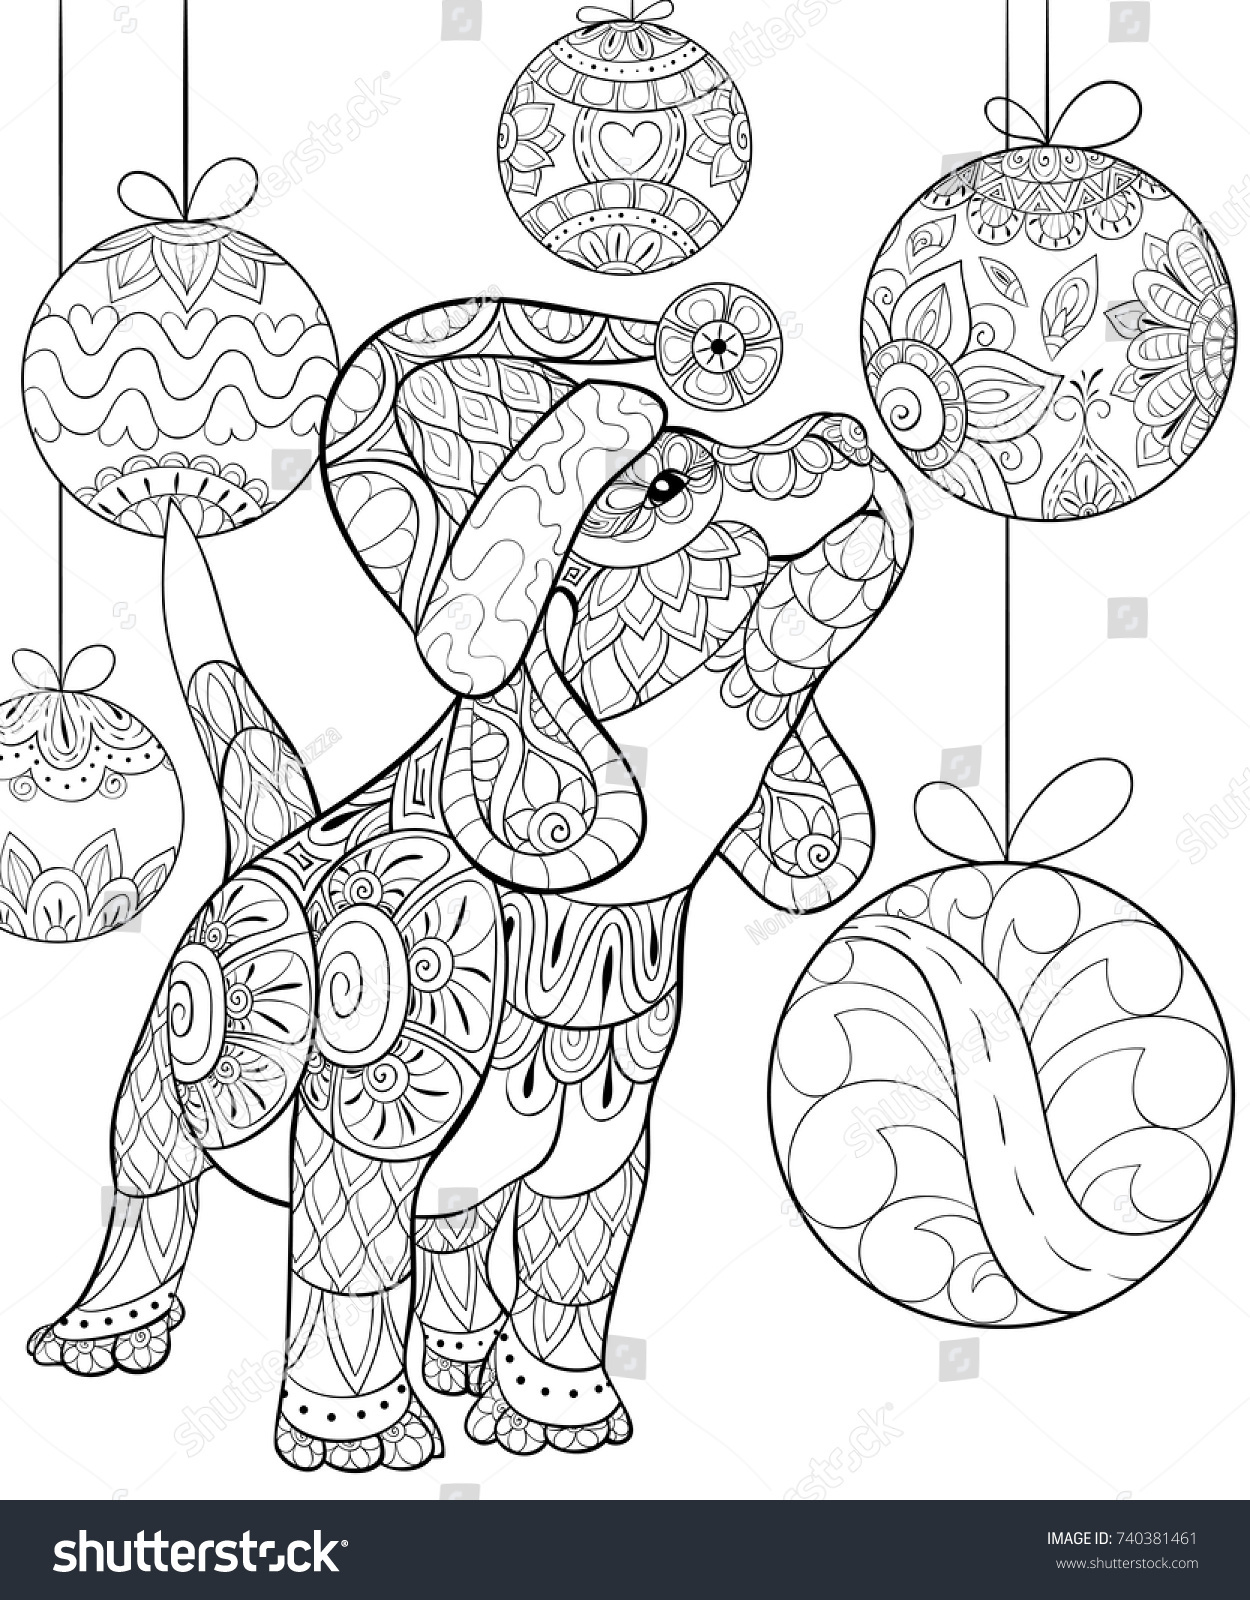 Adult Coloring Pagebook Cute Christmas Puppydog Stock ...